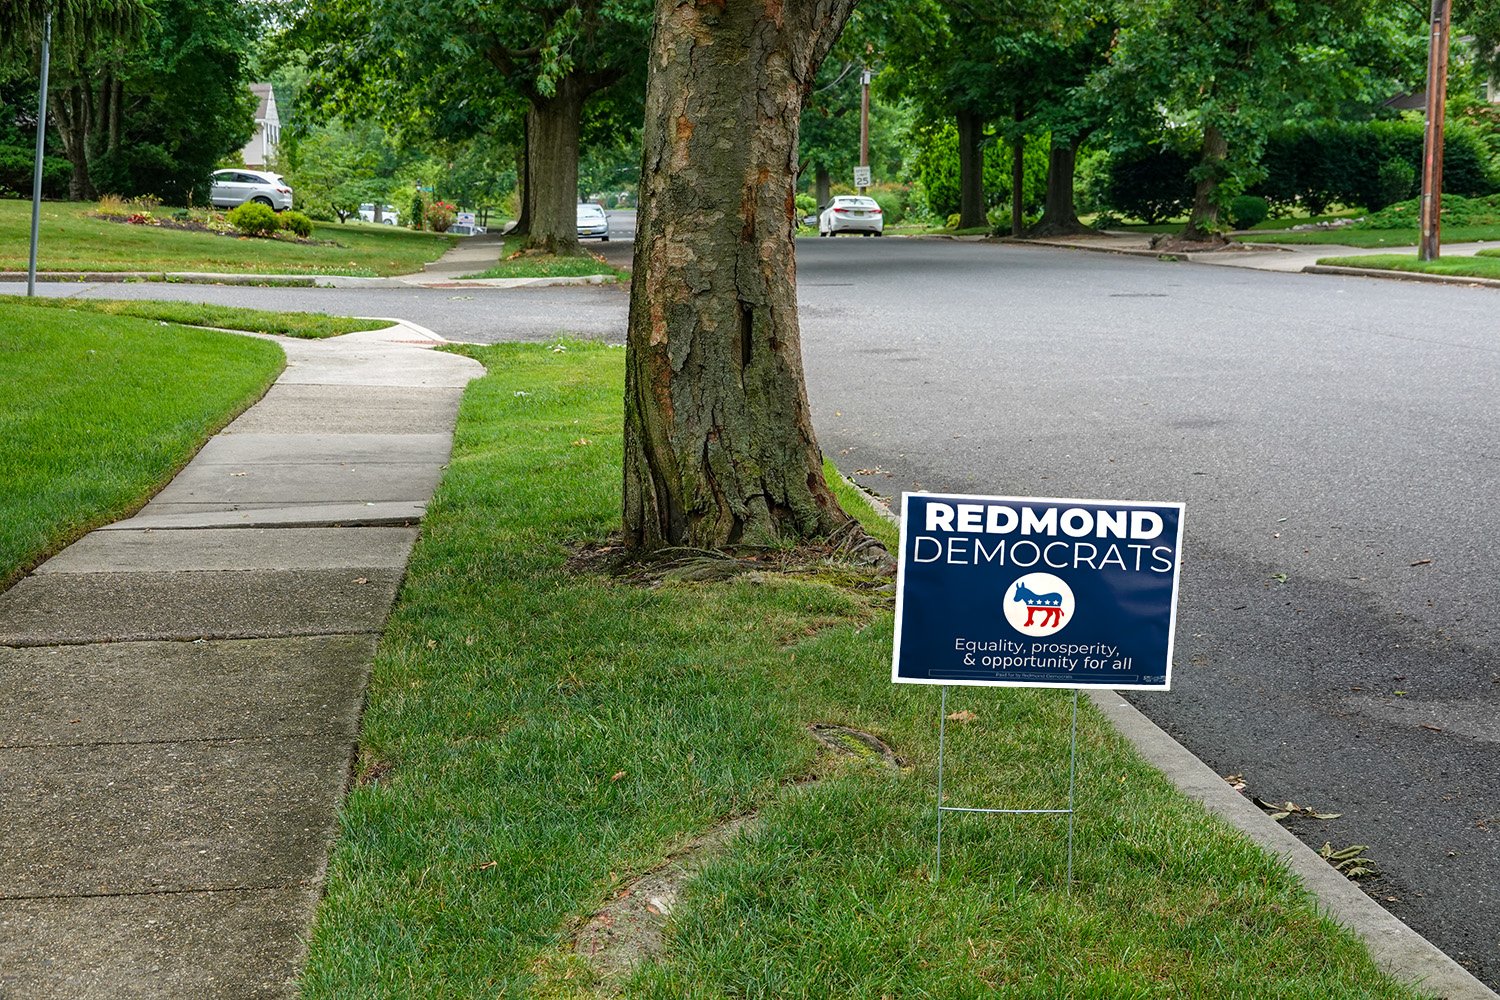 Yard sign on side of residential street